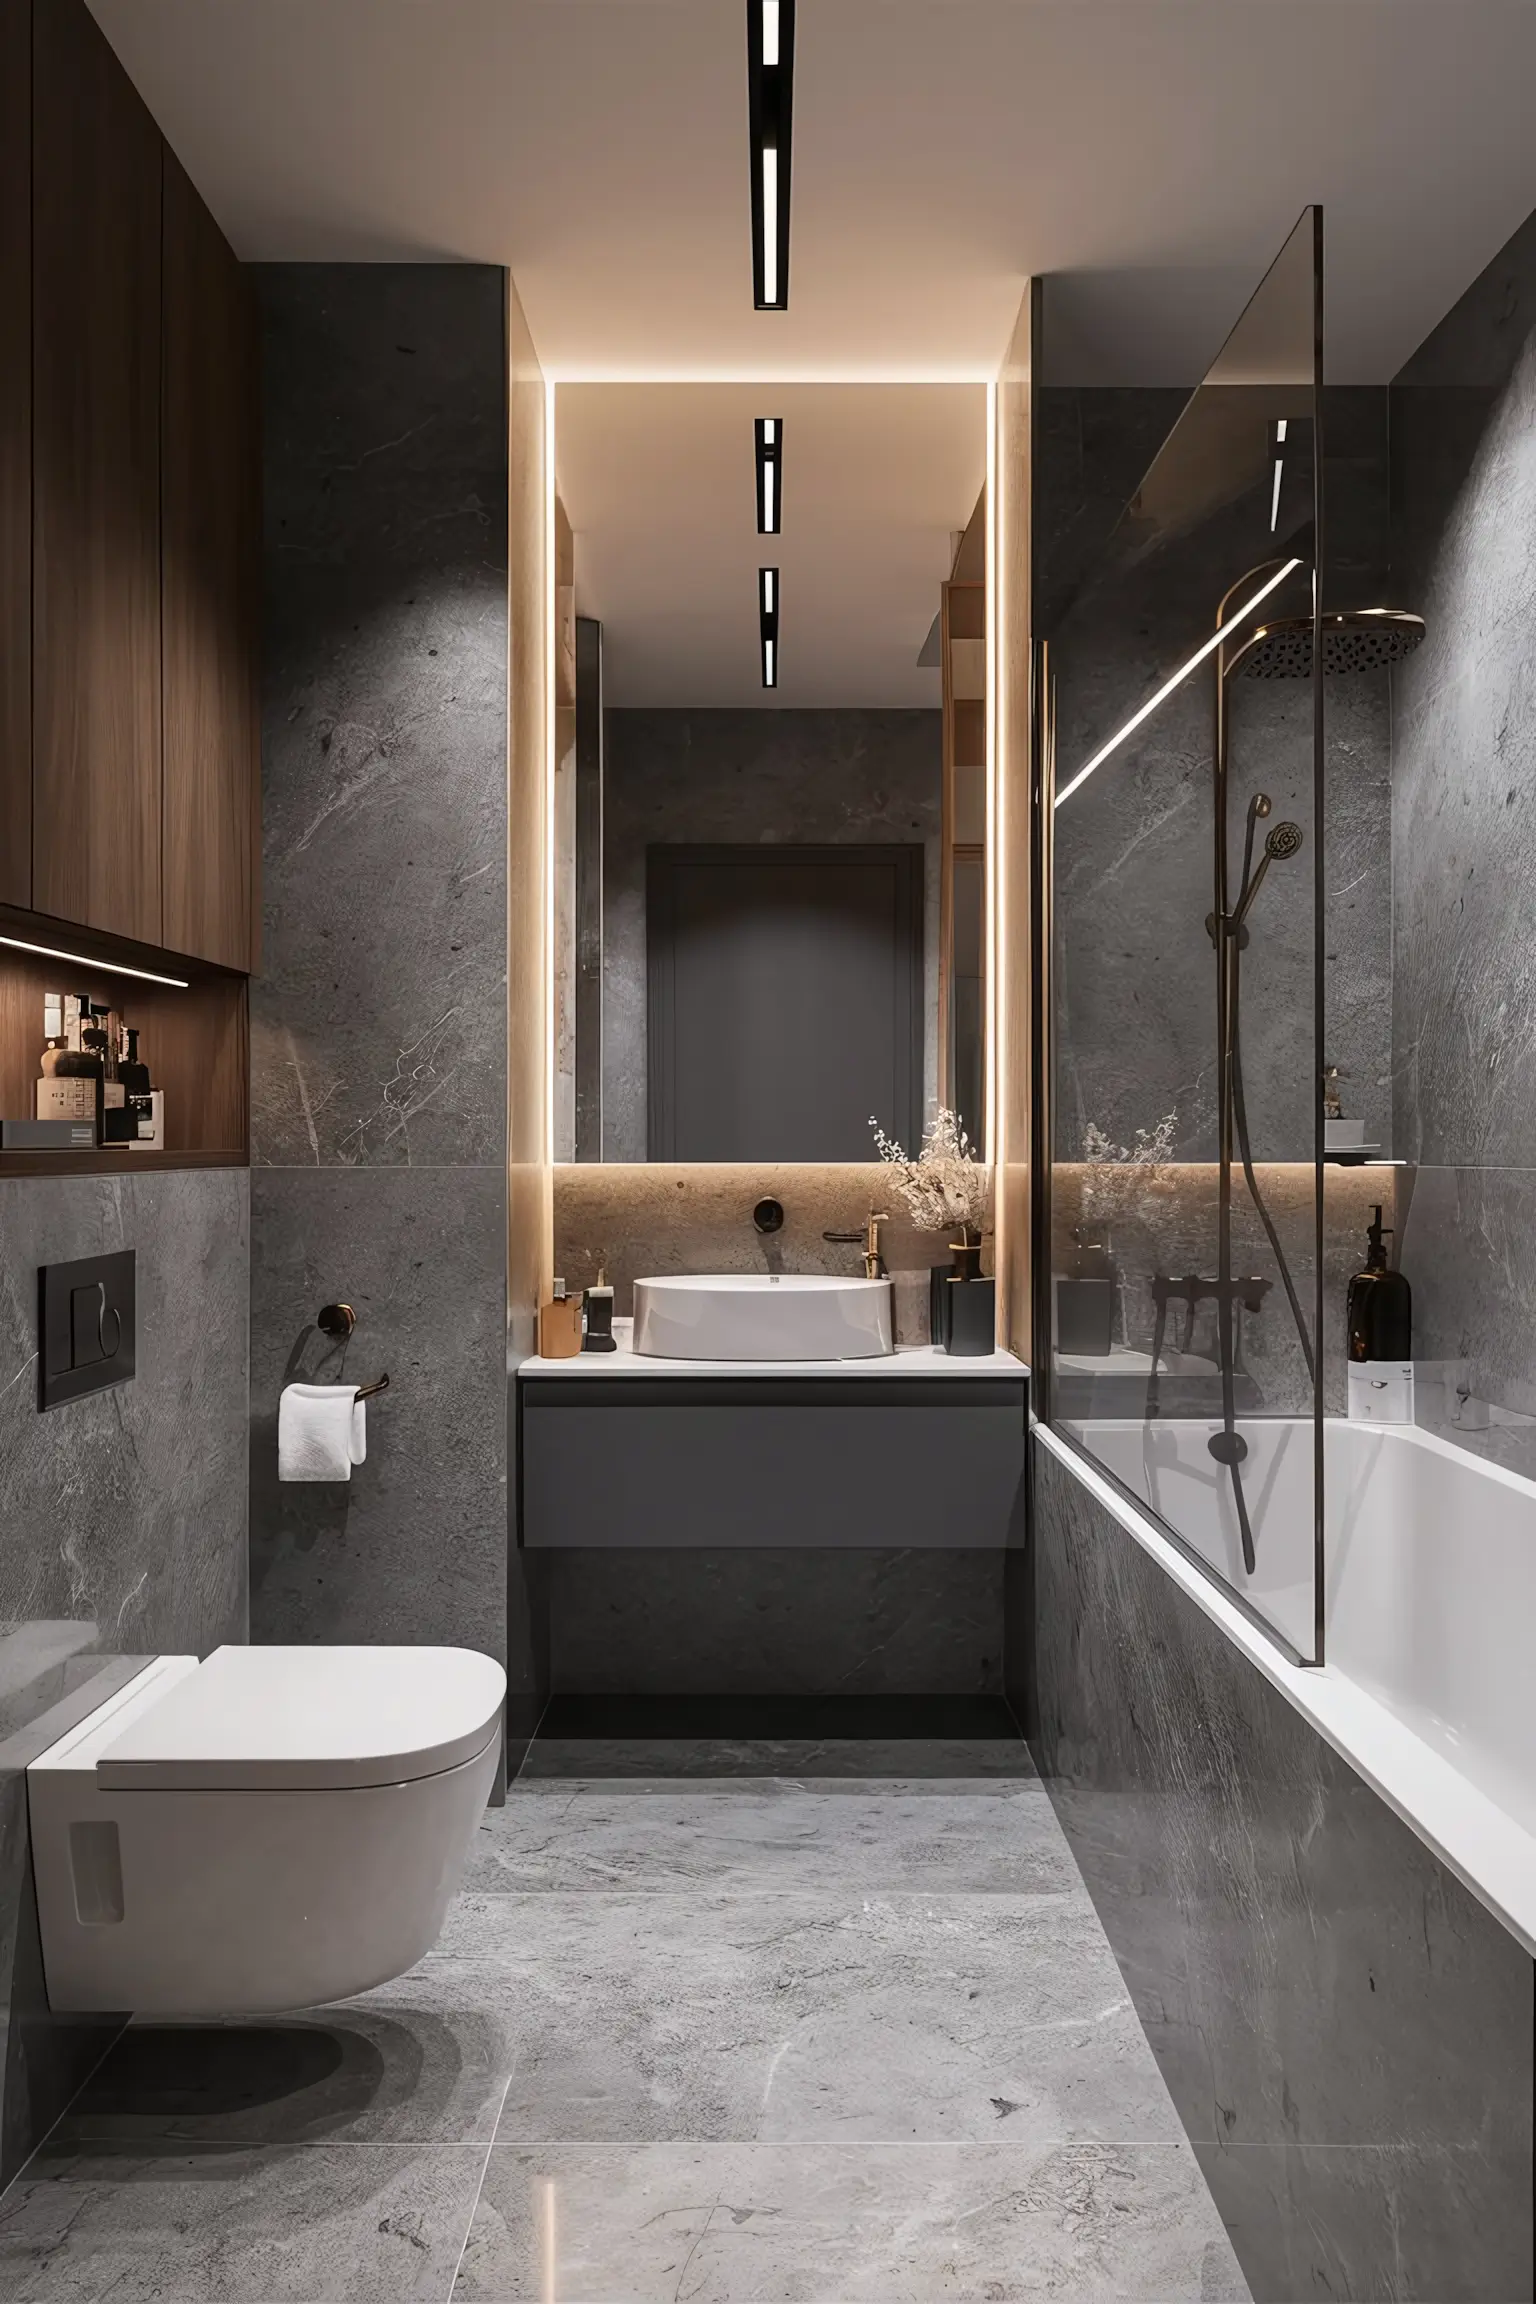 Modern bathroom with contemporary decor and sleek lines.